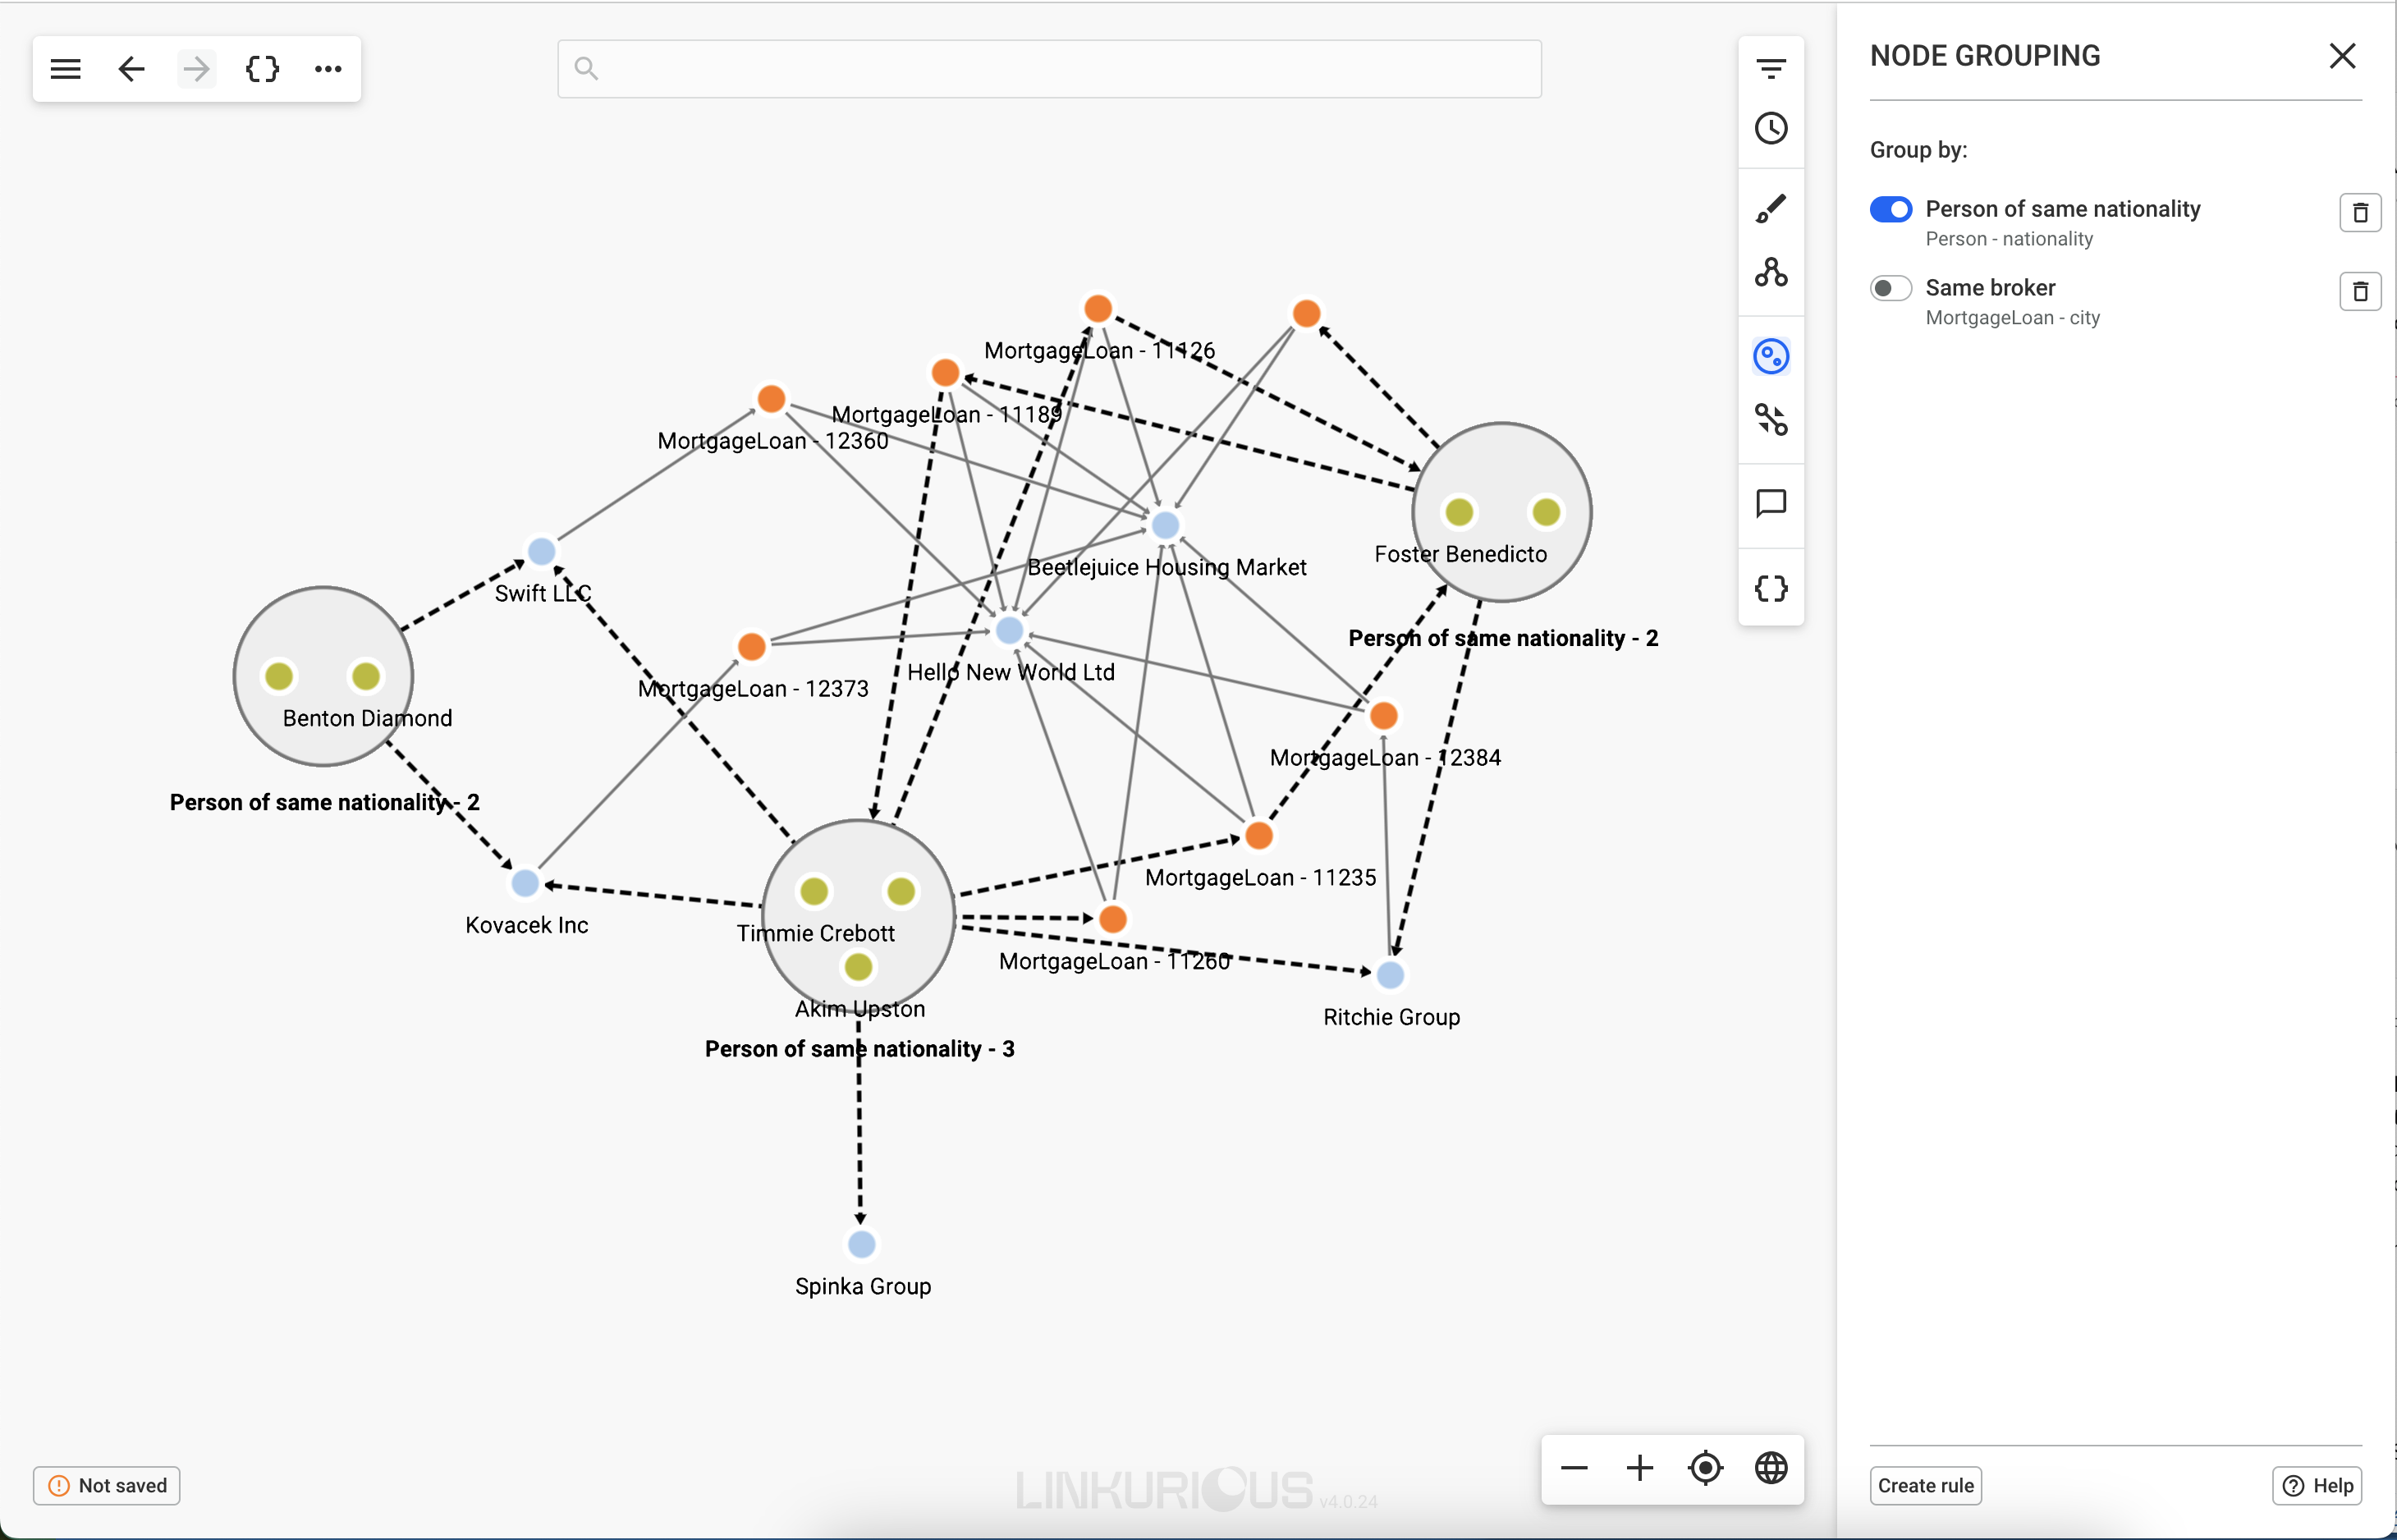 node grouping in a graph visualization in Linkurious Enterprise